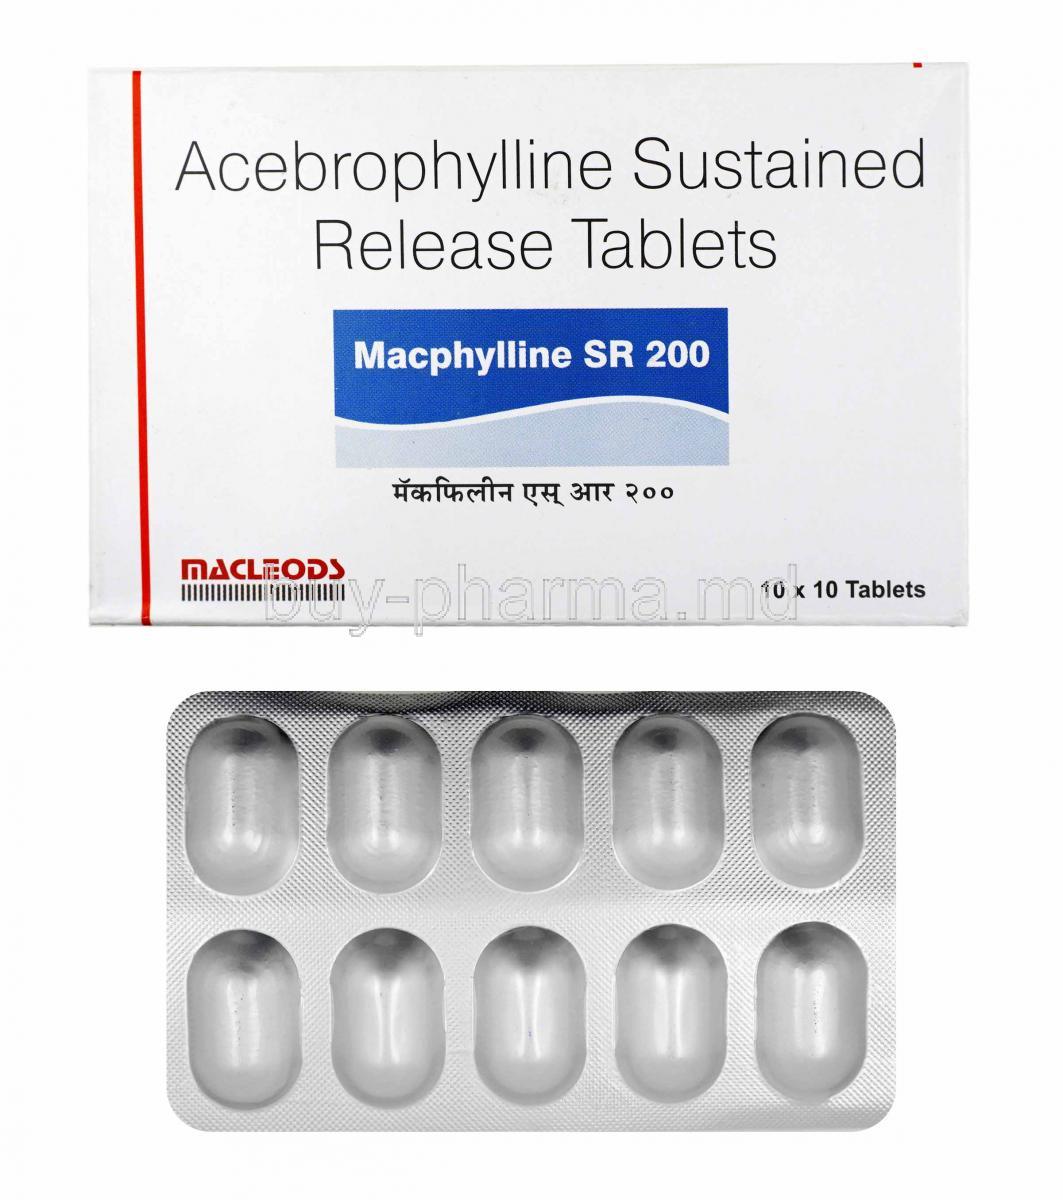 Macphylline, Acebrophylline 200mg box and tablets